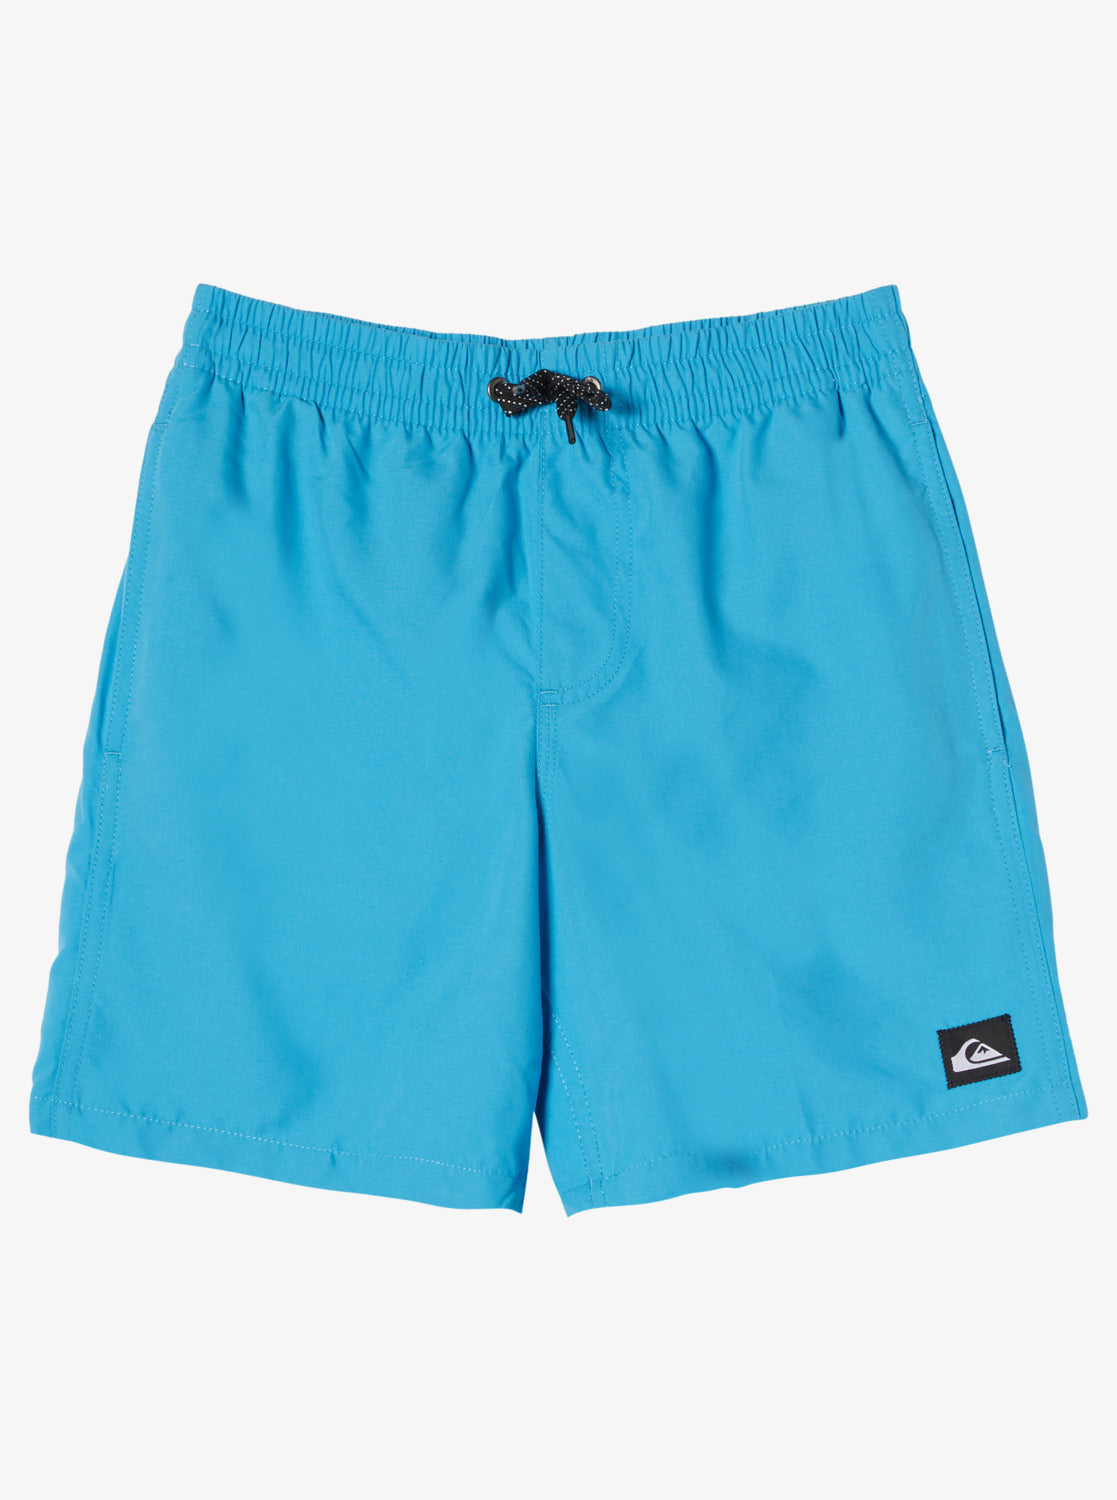 Quiksilver Everyday Volley Youth 15" - 88 Gear